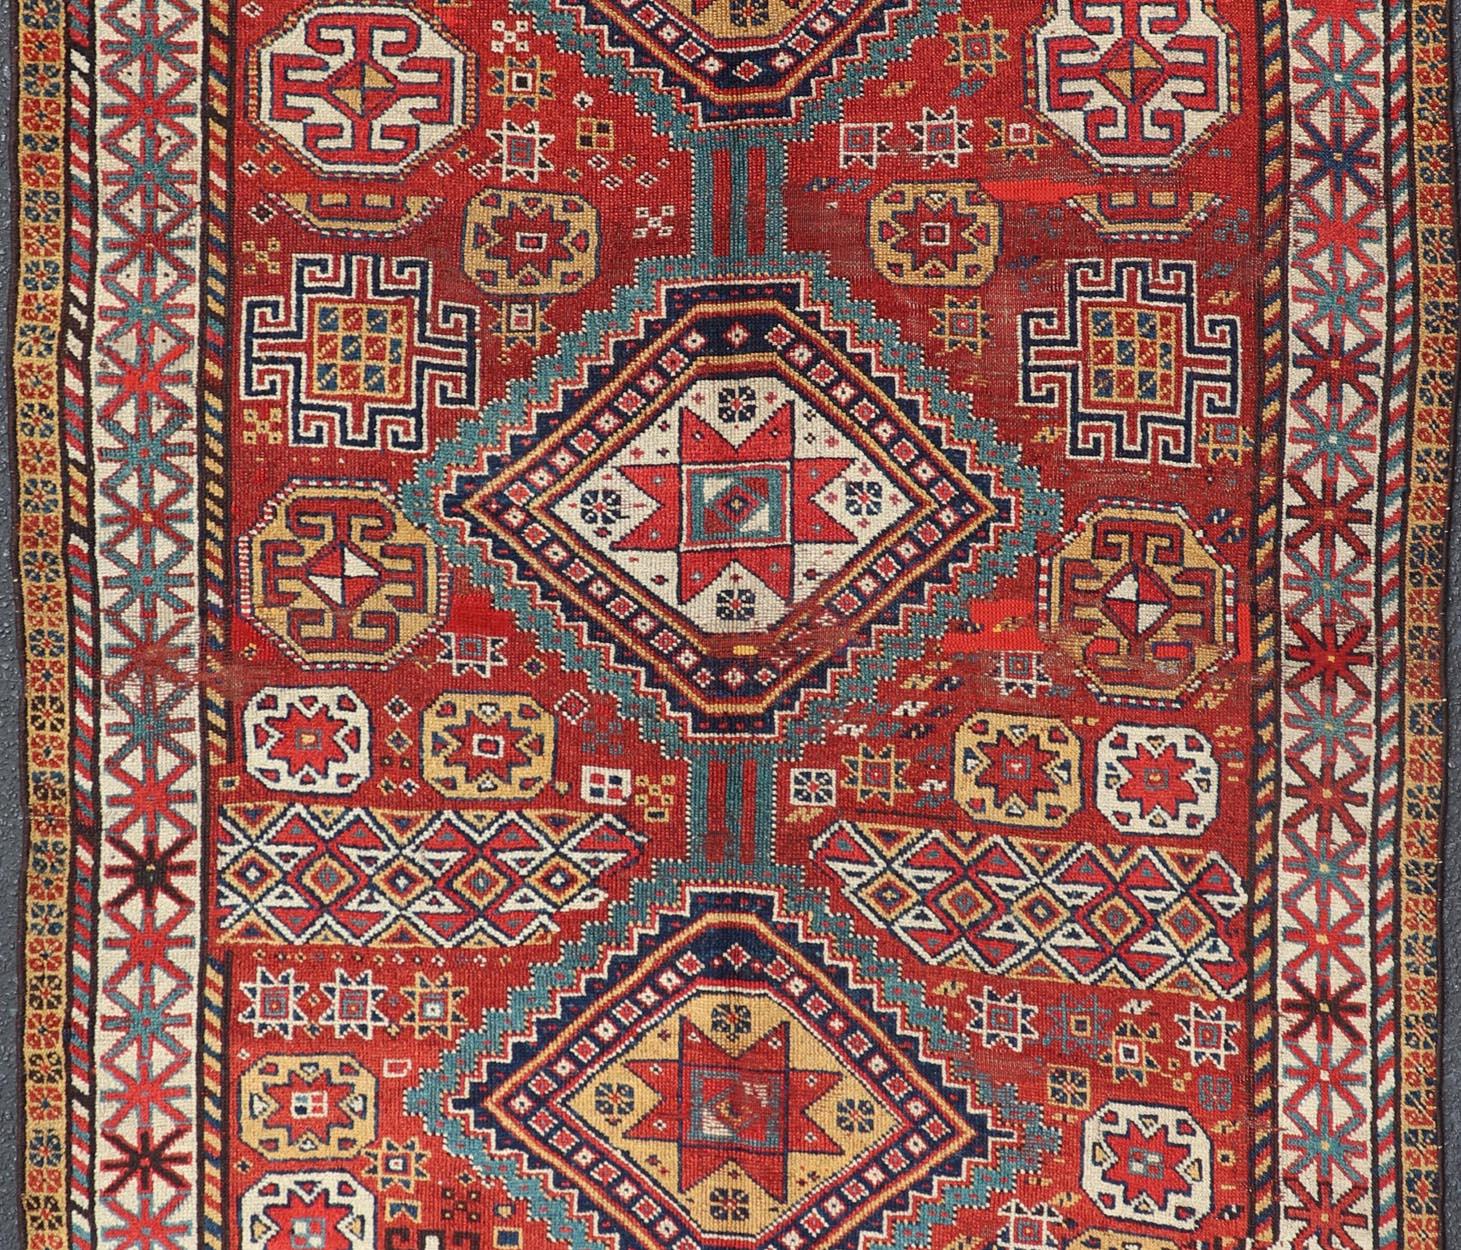 Kazak Unique Antique Qashqai Rug with Geometric Motifs in Red, Blue, and Golden Yellow For Sale